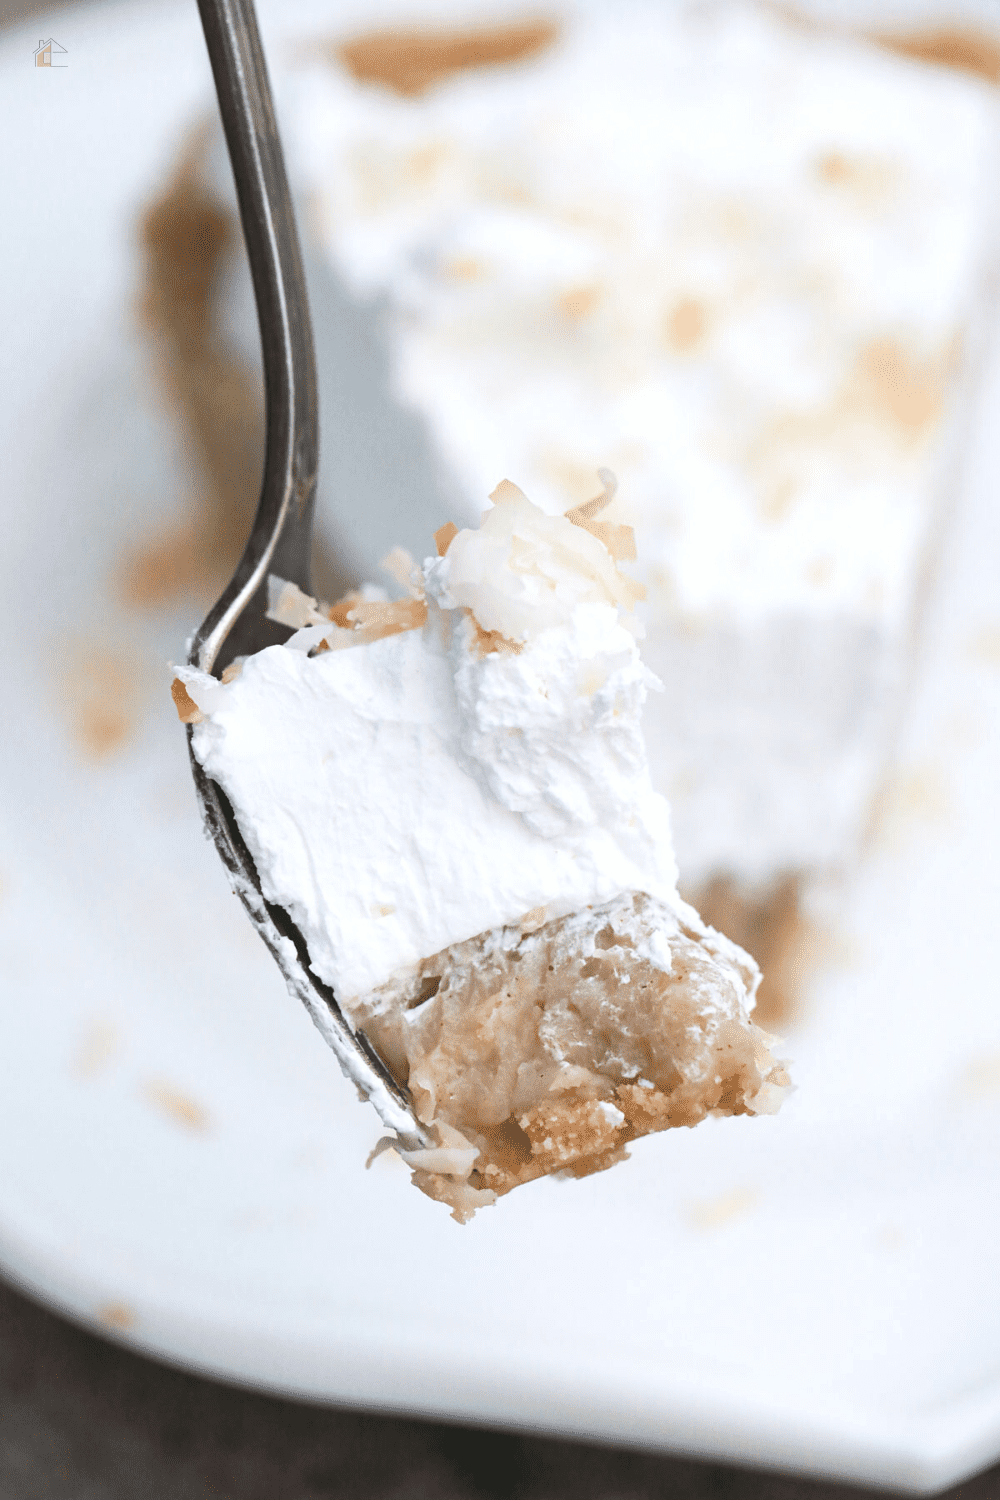 No baking is necessary with this holiday dessert recipe! This coconut rum cream pie is super easy and always a crowd-pleaser. Serve it to your family and friends, or save it for later. via @mystayathome